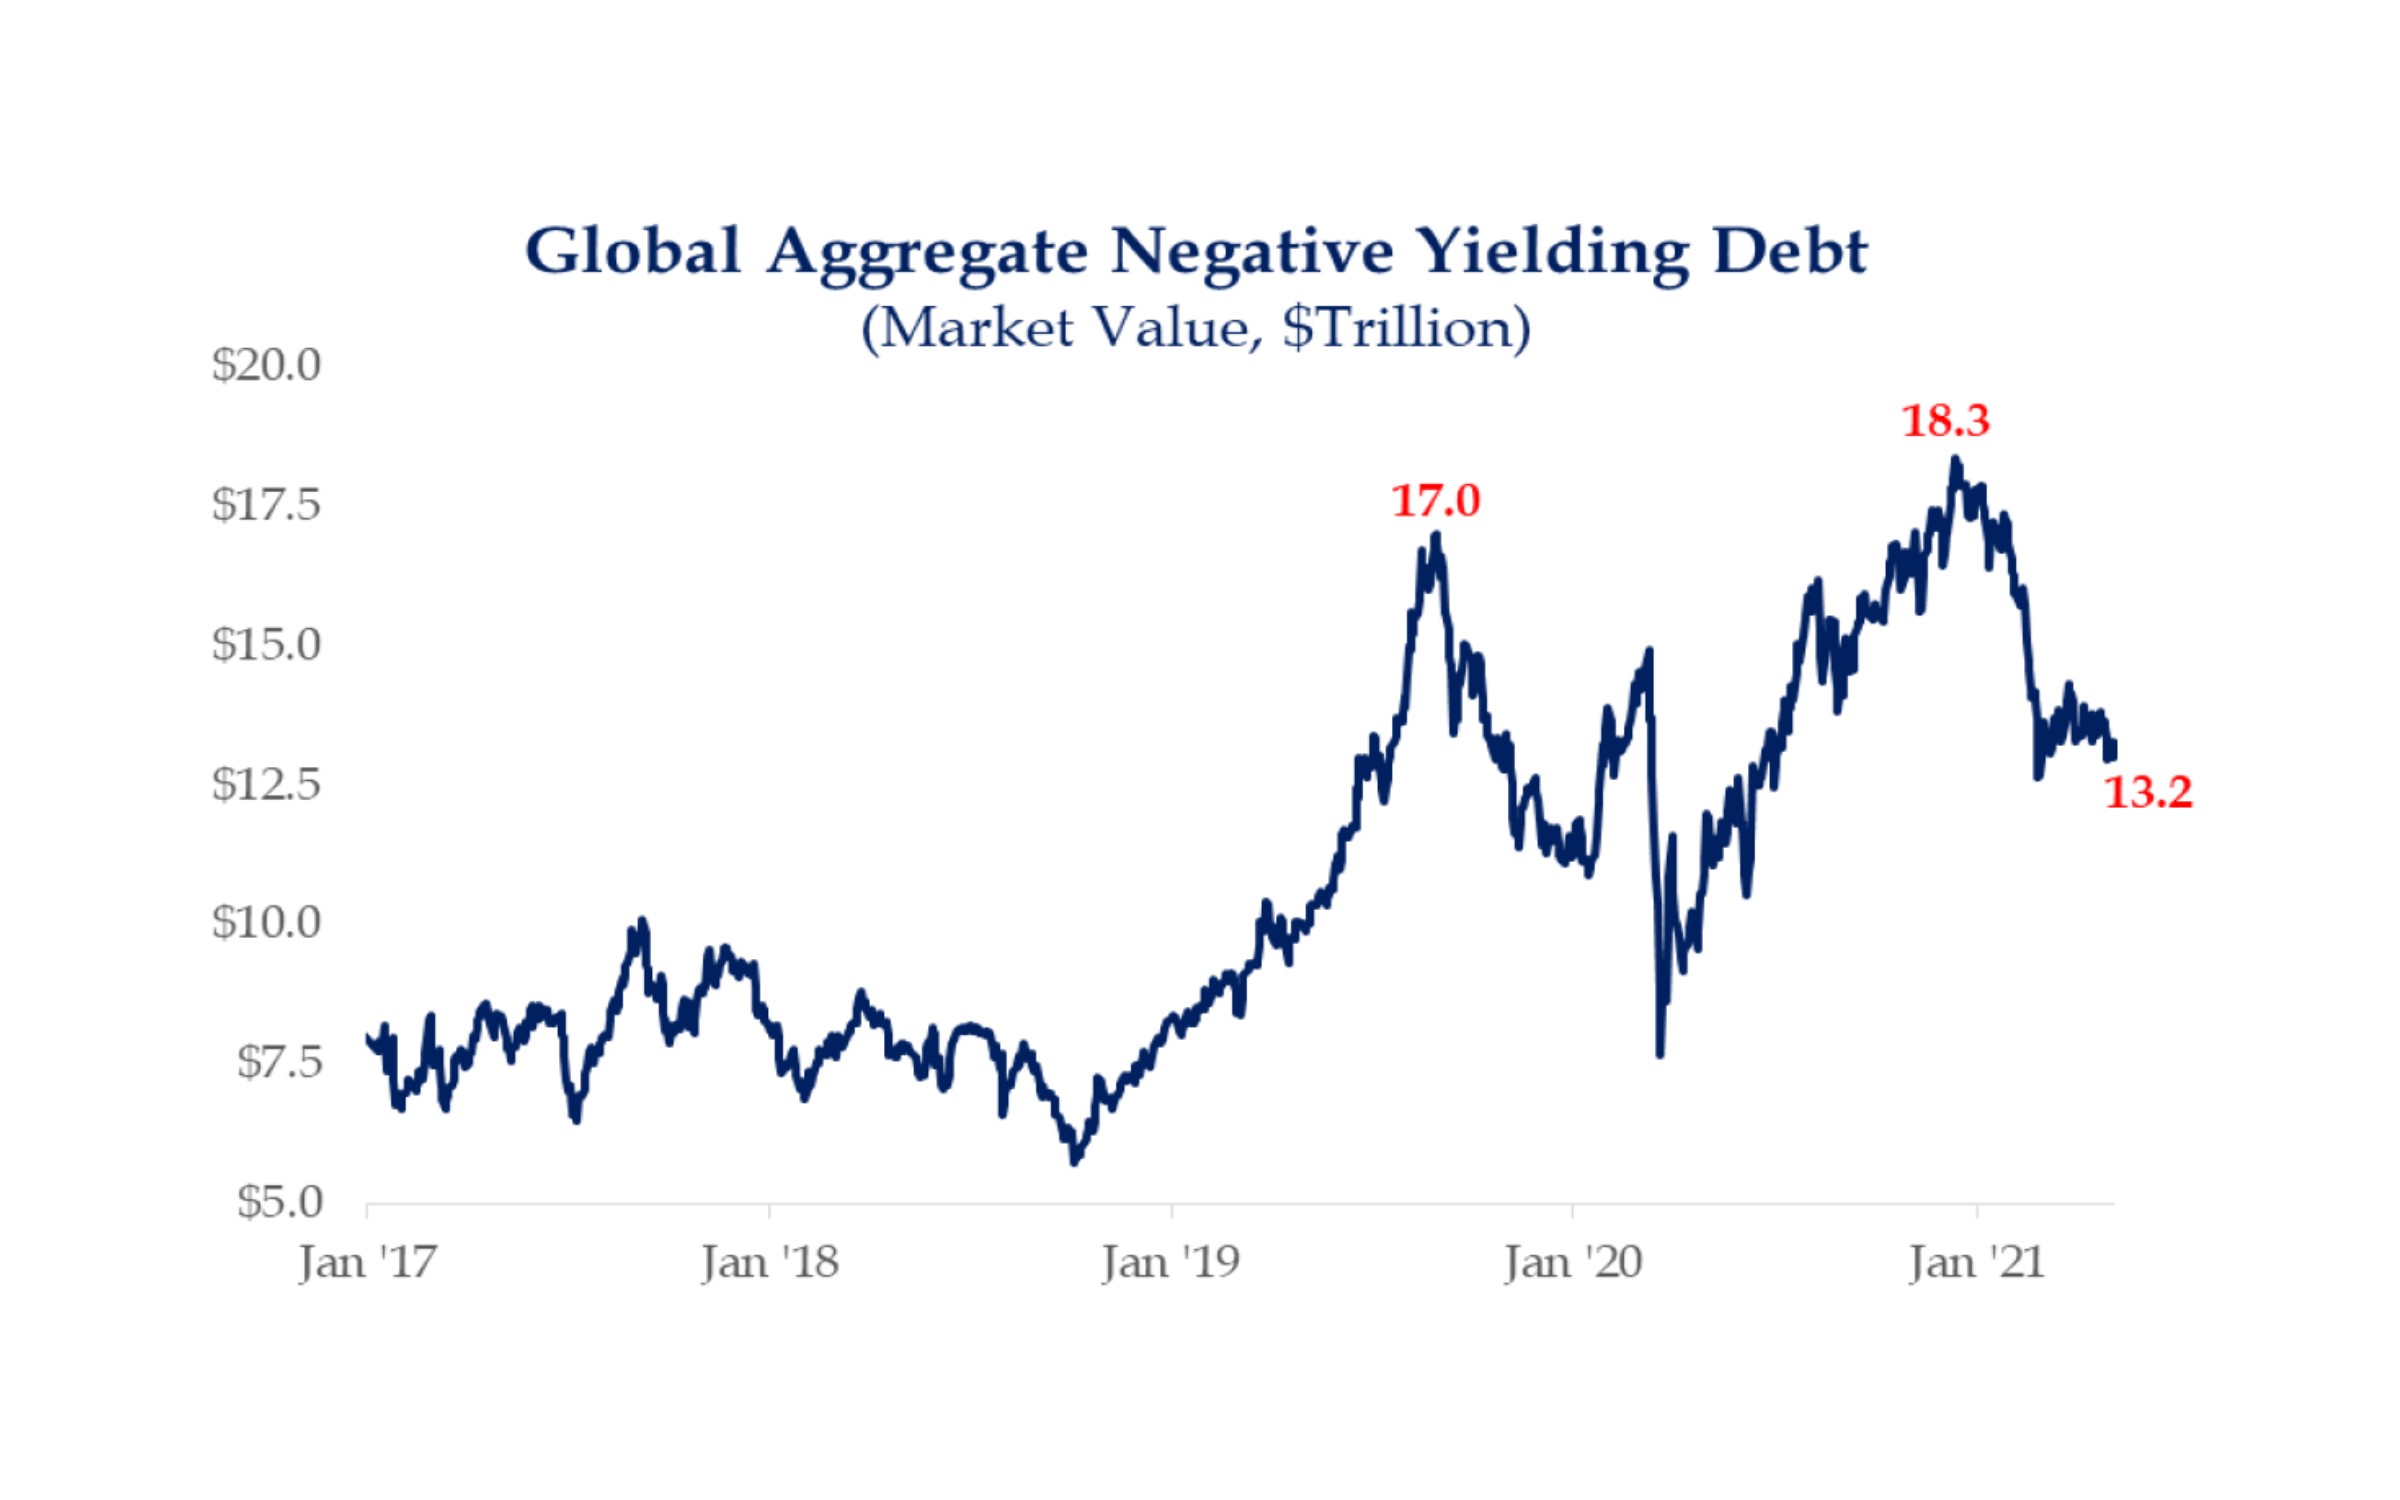 Global Aggregate Yielding debt is lower than it's peak earlier in 2021, but still at high levels